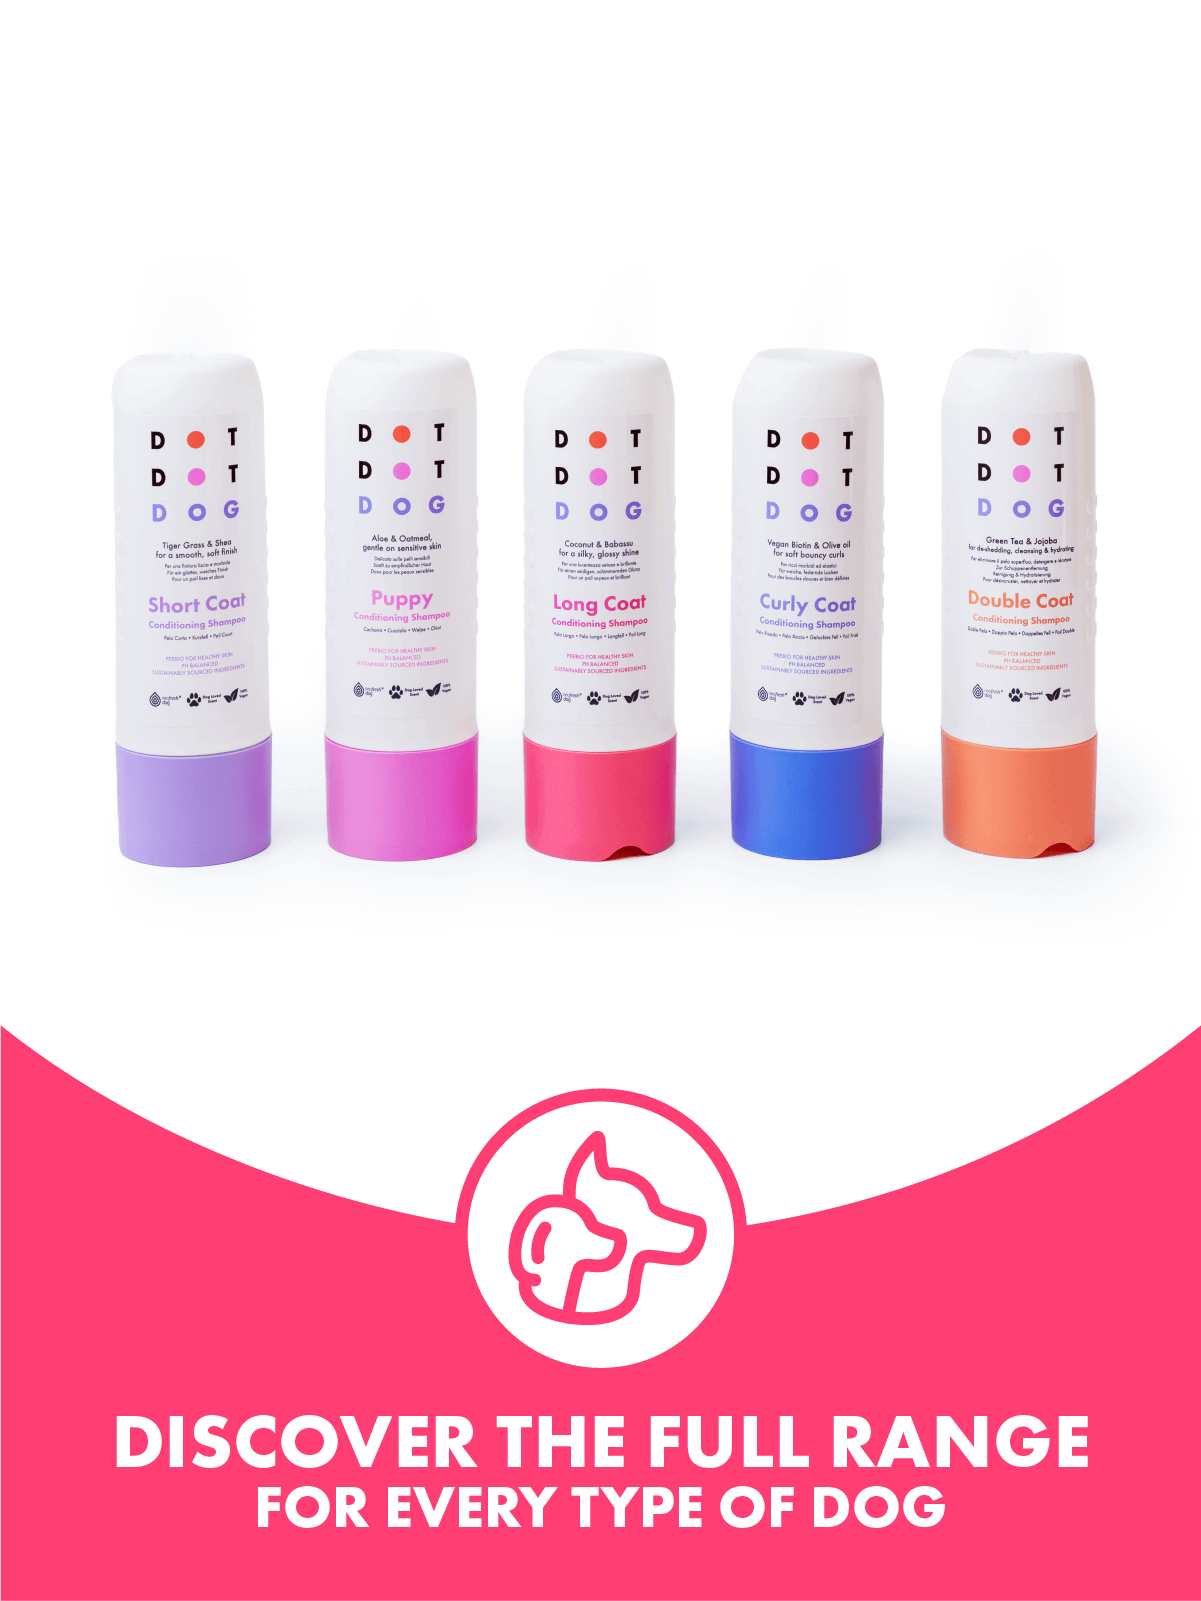 Full range of DotDotPet shampoos with prebiotic for healthy skin, vegan no nasties formulation, dog loved fragrance for calm bath time, neofresh technology for smelly dogs